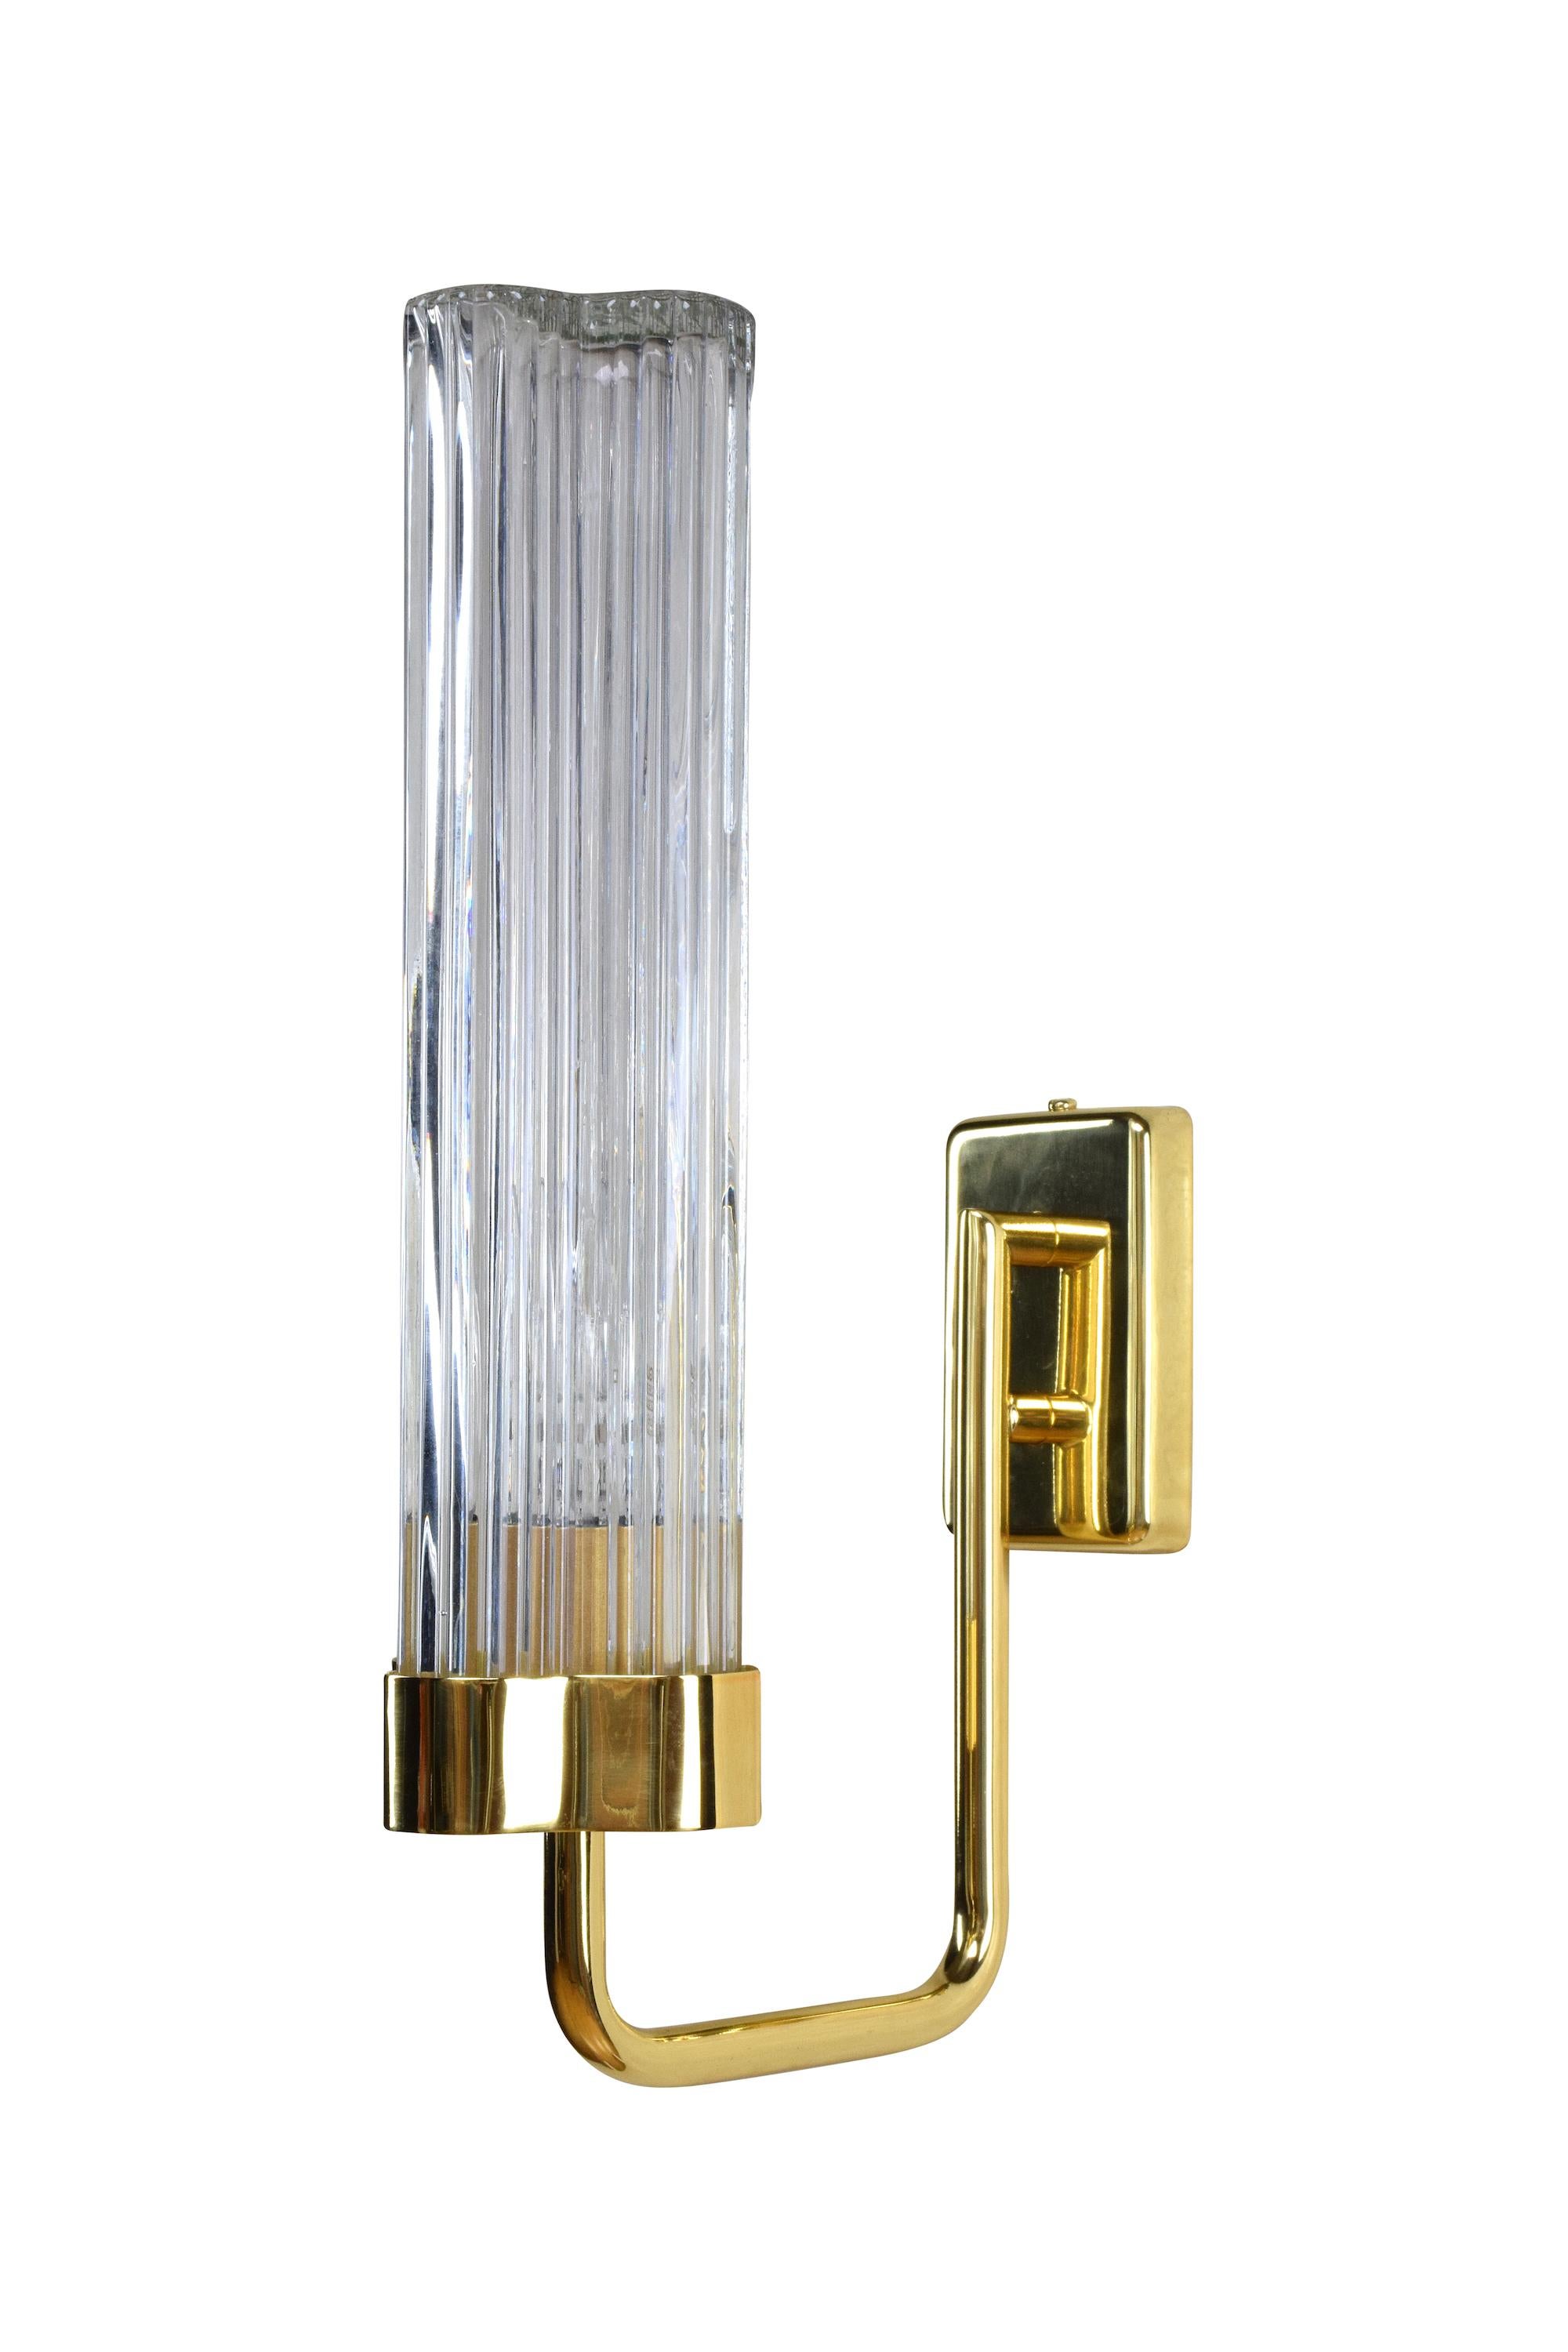 This wall light is designed with a slender brass structure and a textured glass shade with vertical lines morphing into an organic shape. This model comes with a single fixture, but a double fixture is also available in our studio.

Light source: